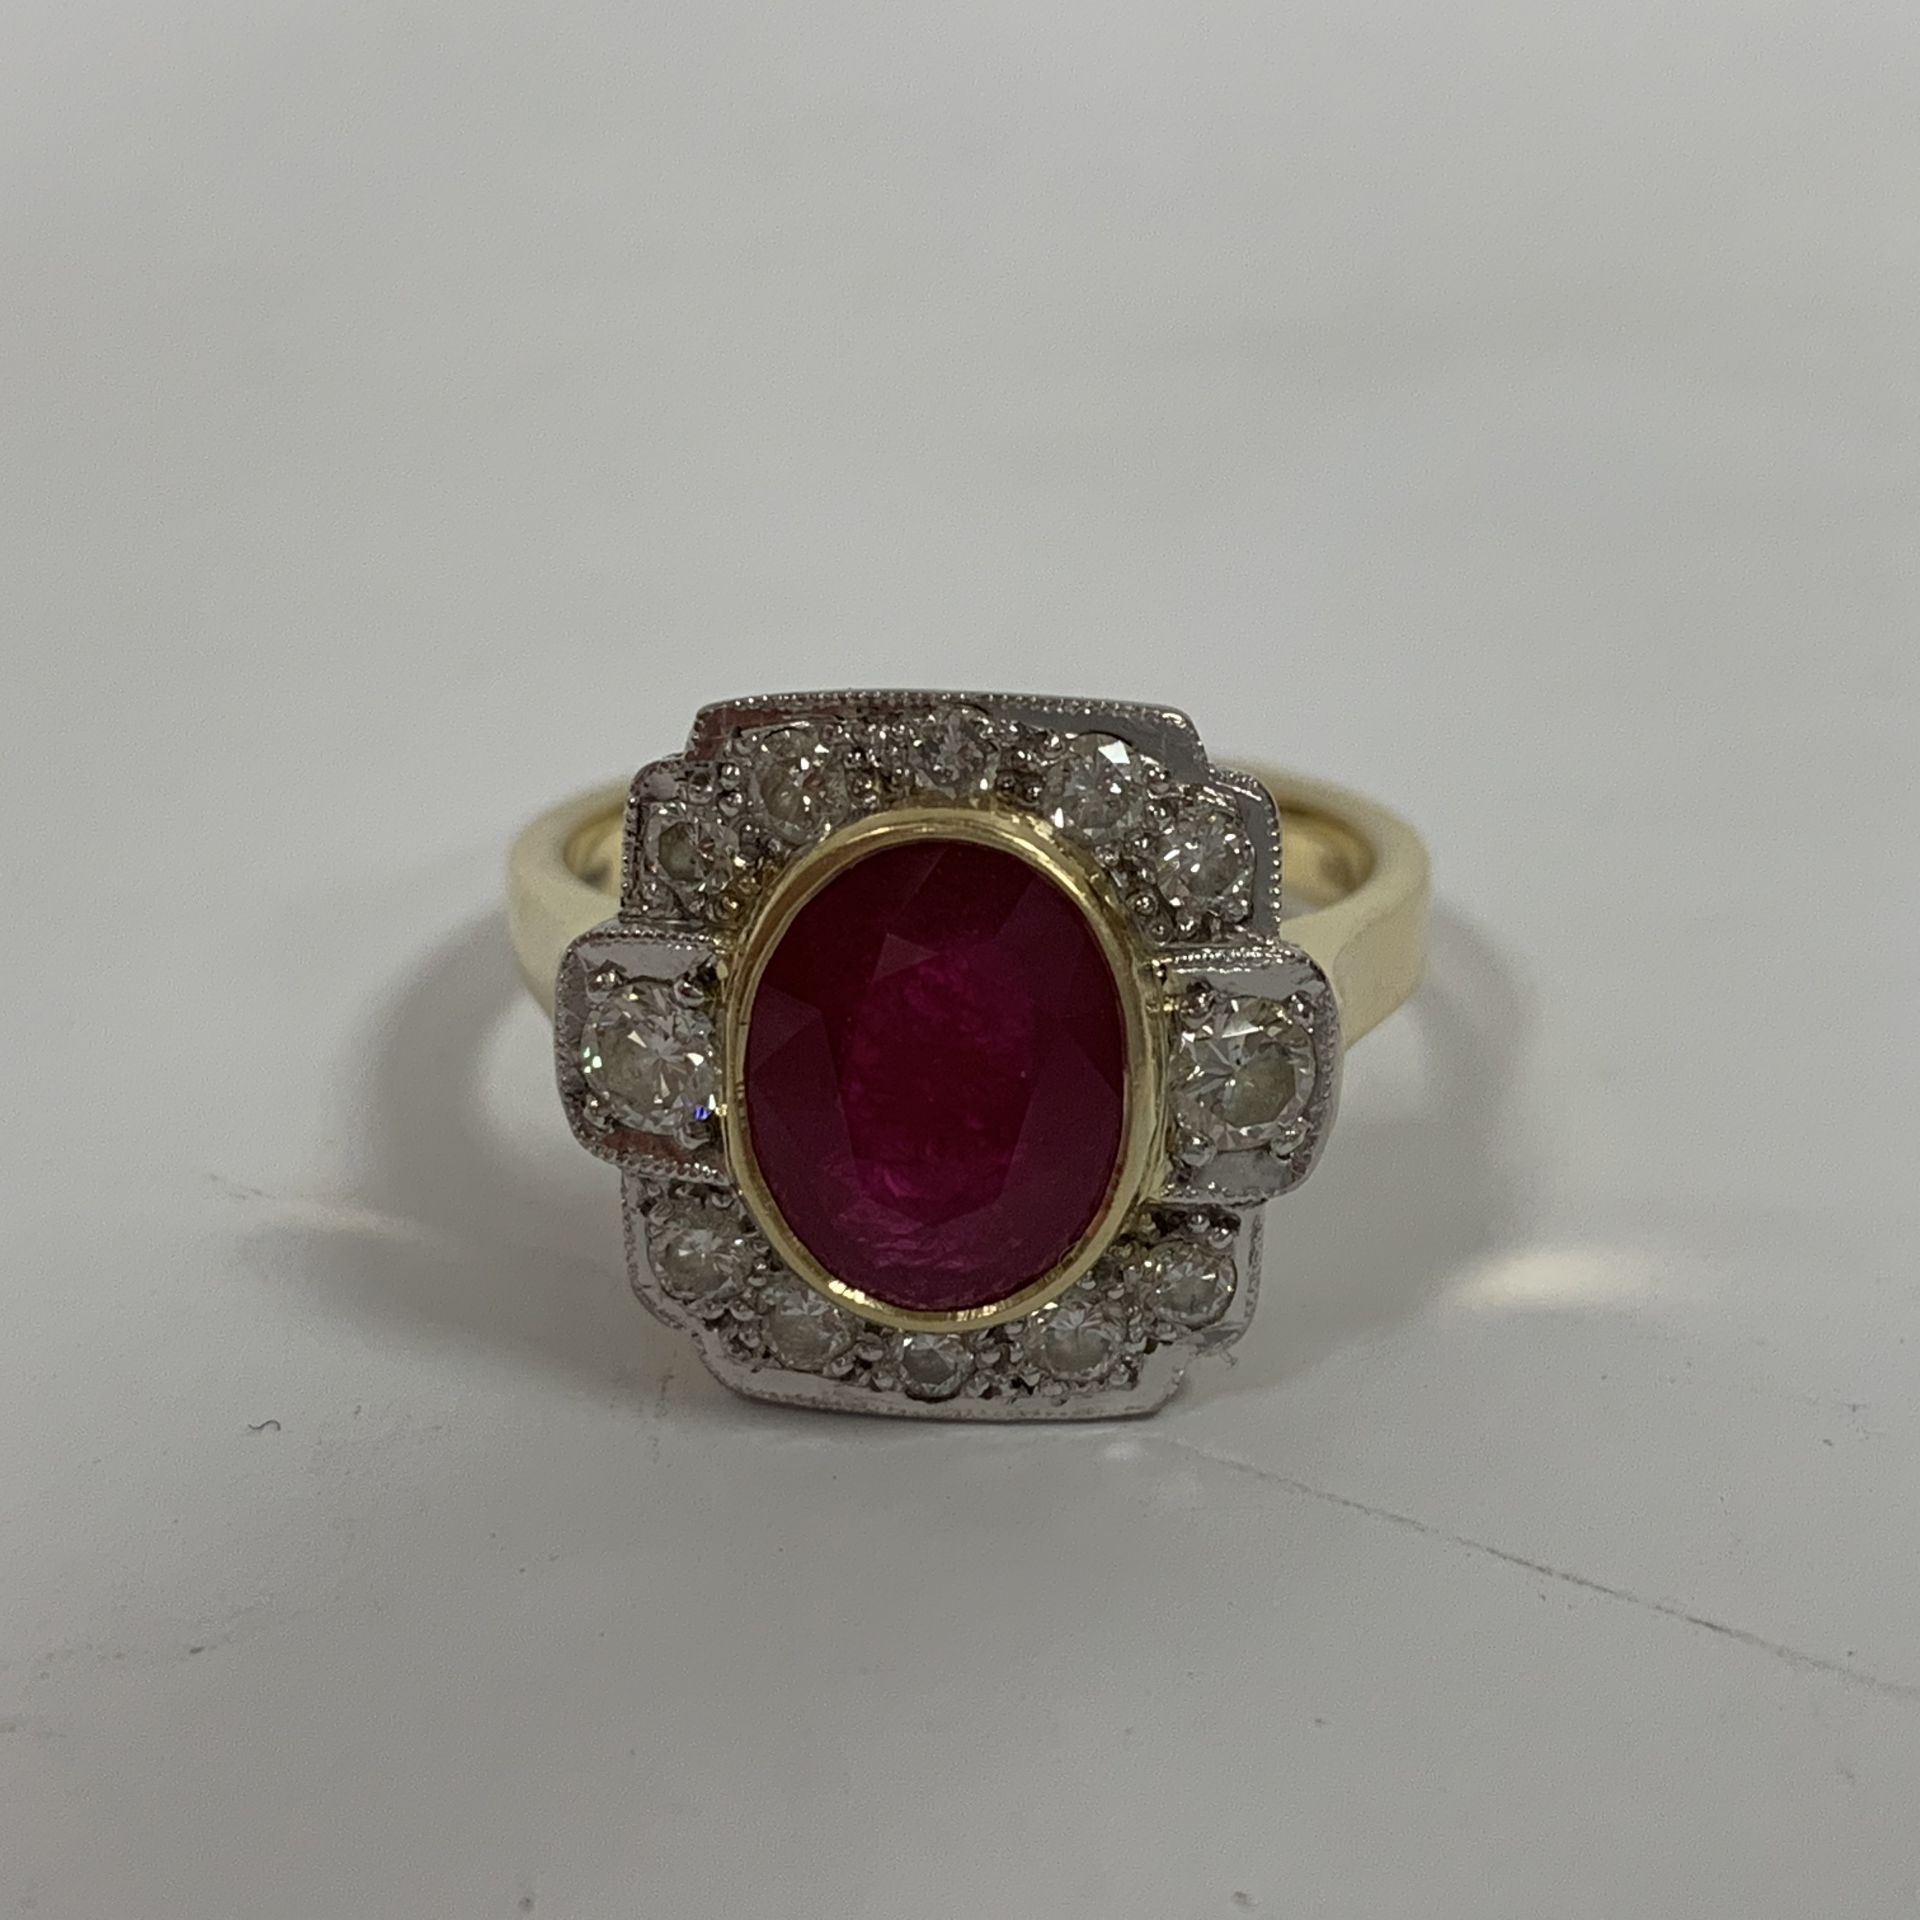 An Art Deco style ruby and diamond ring complete with valuation certificate which details the ring - Image 2 of 8